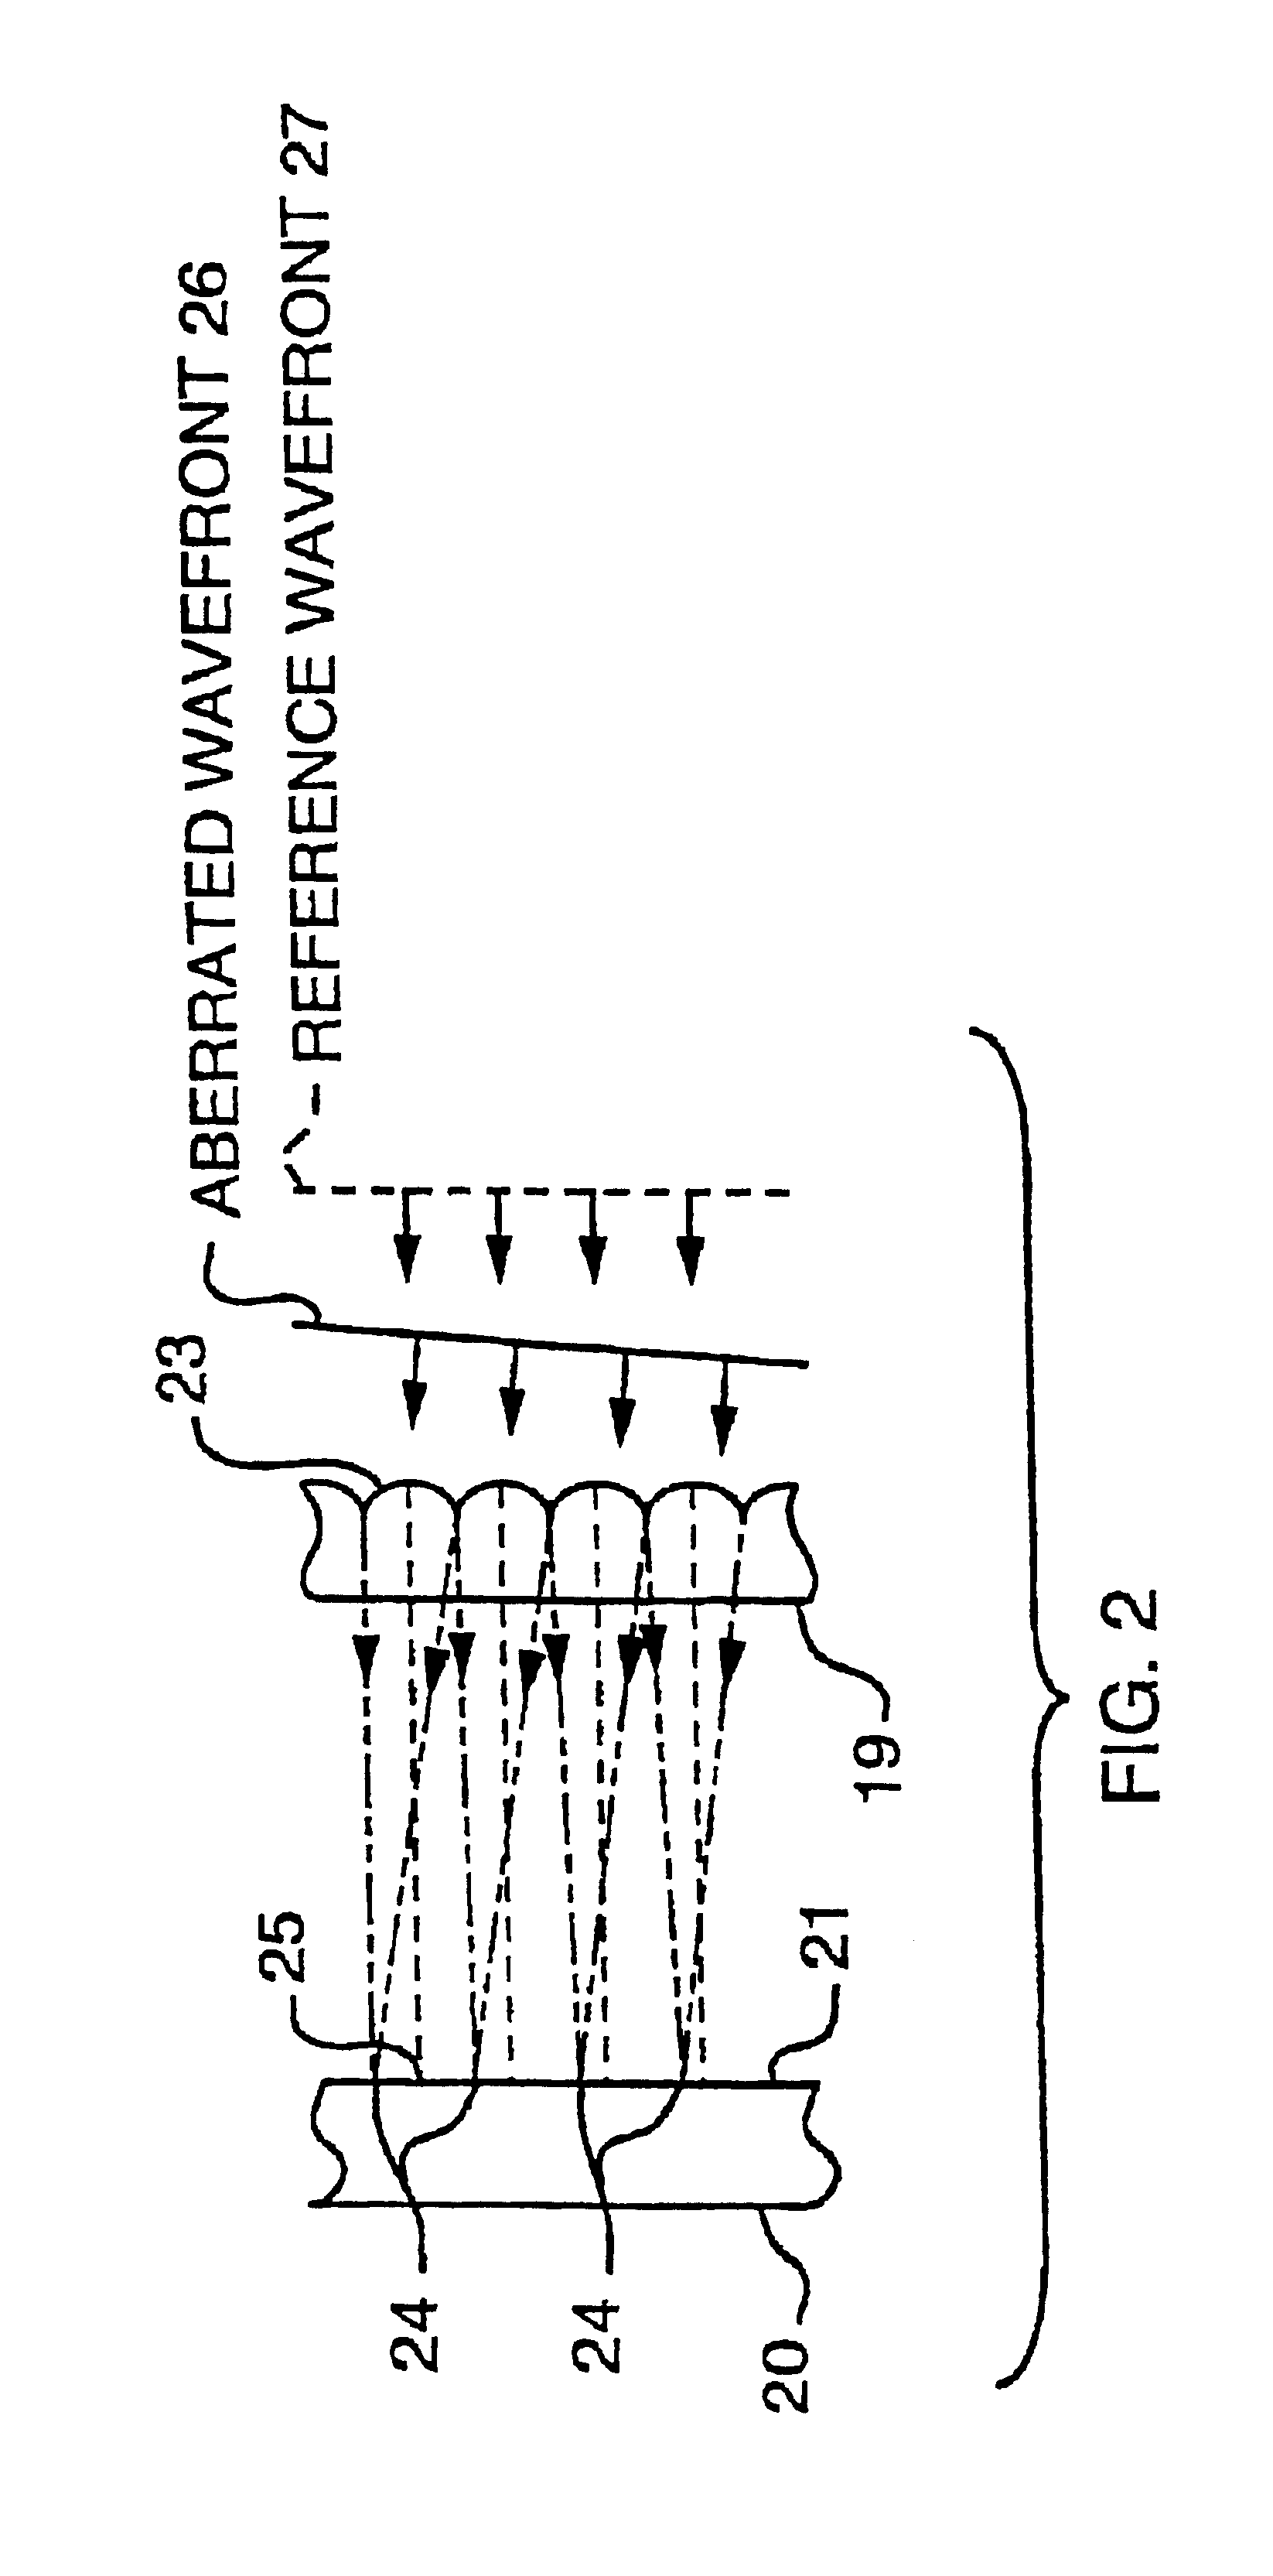 Methods and devices to design and fabricate surfaces on contact lenses and on corneal tissue that correct the eye's optical aberrations